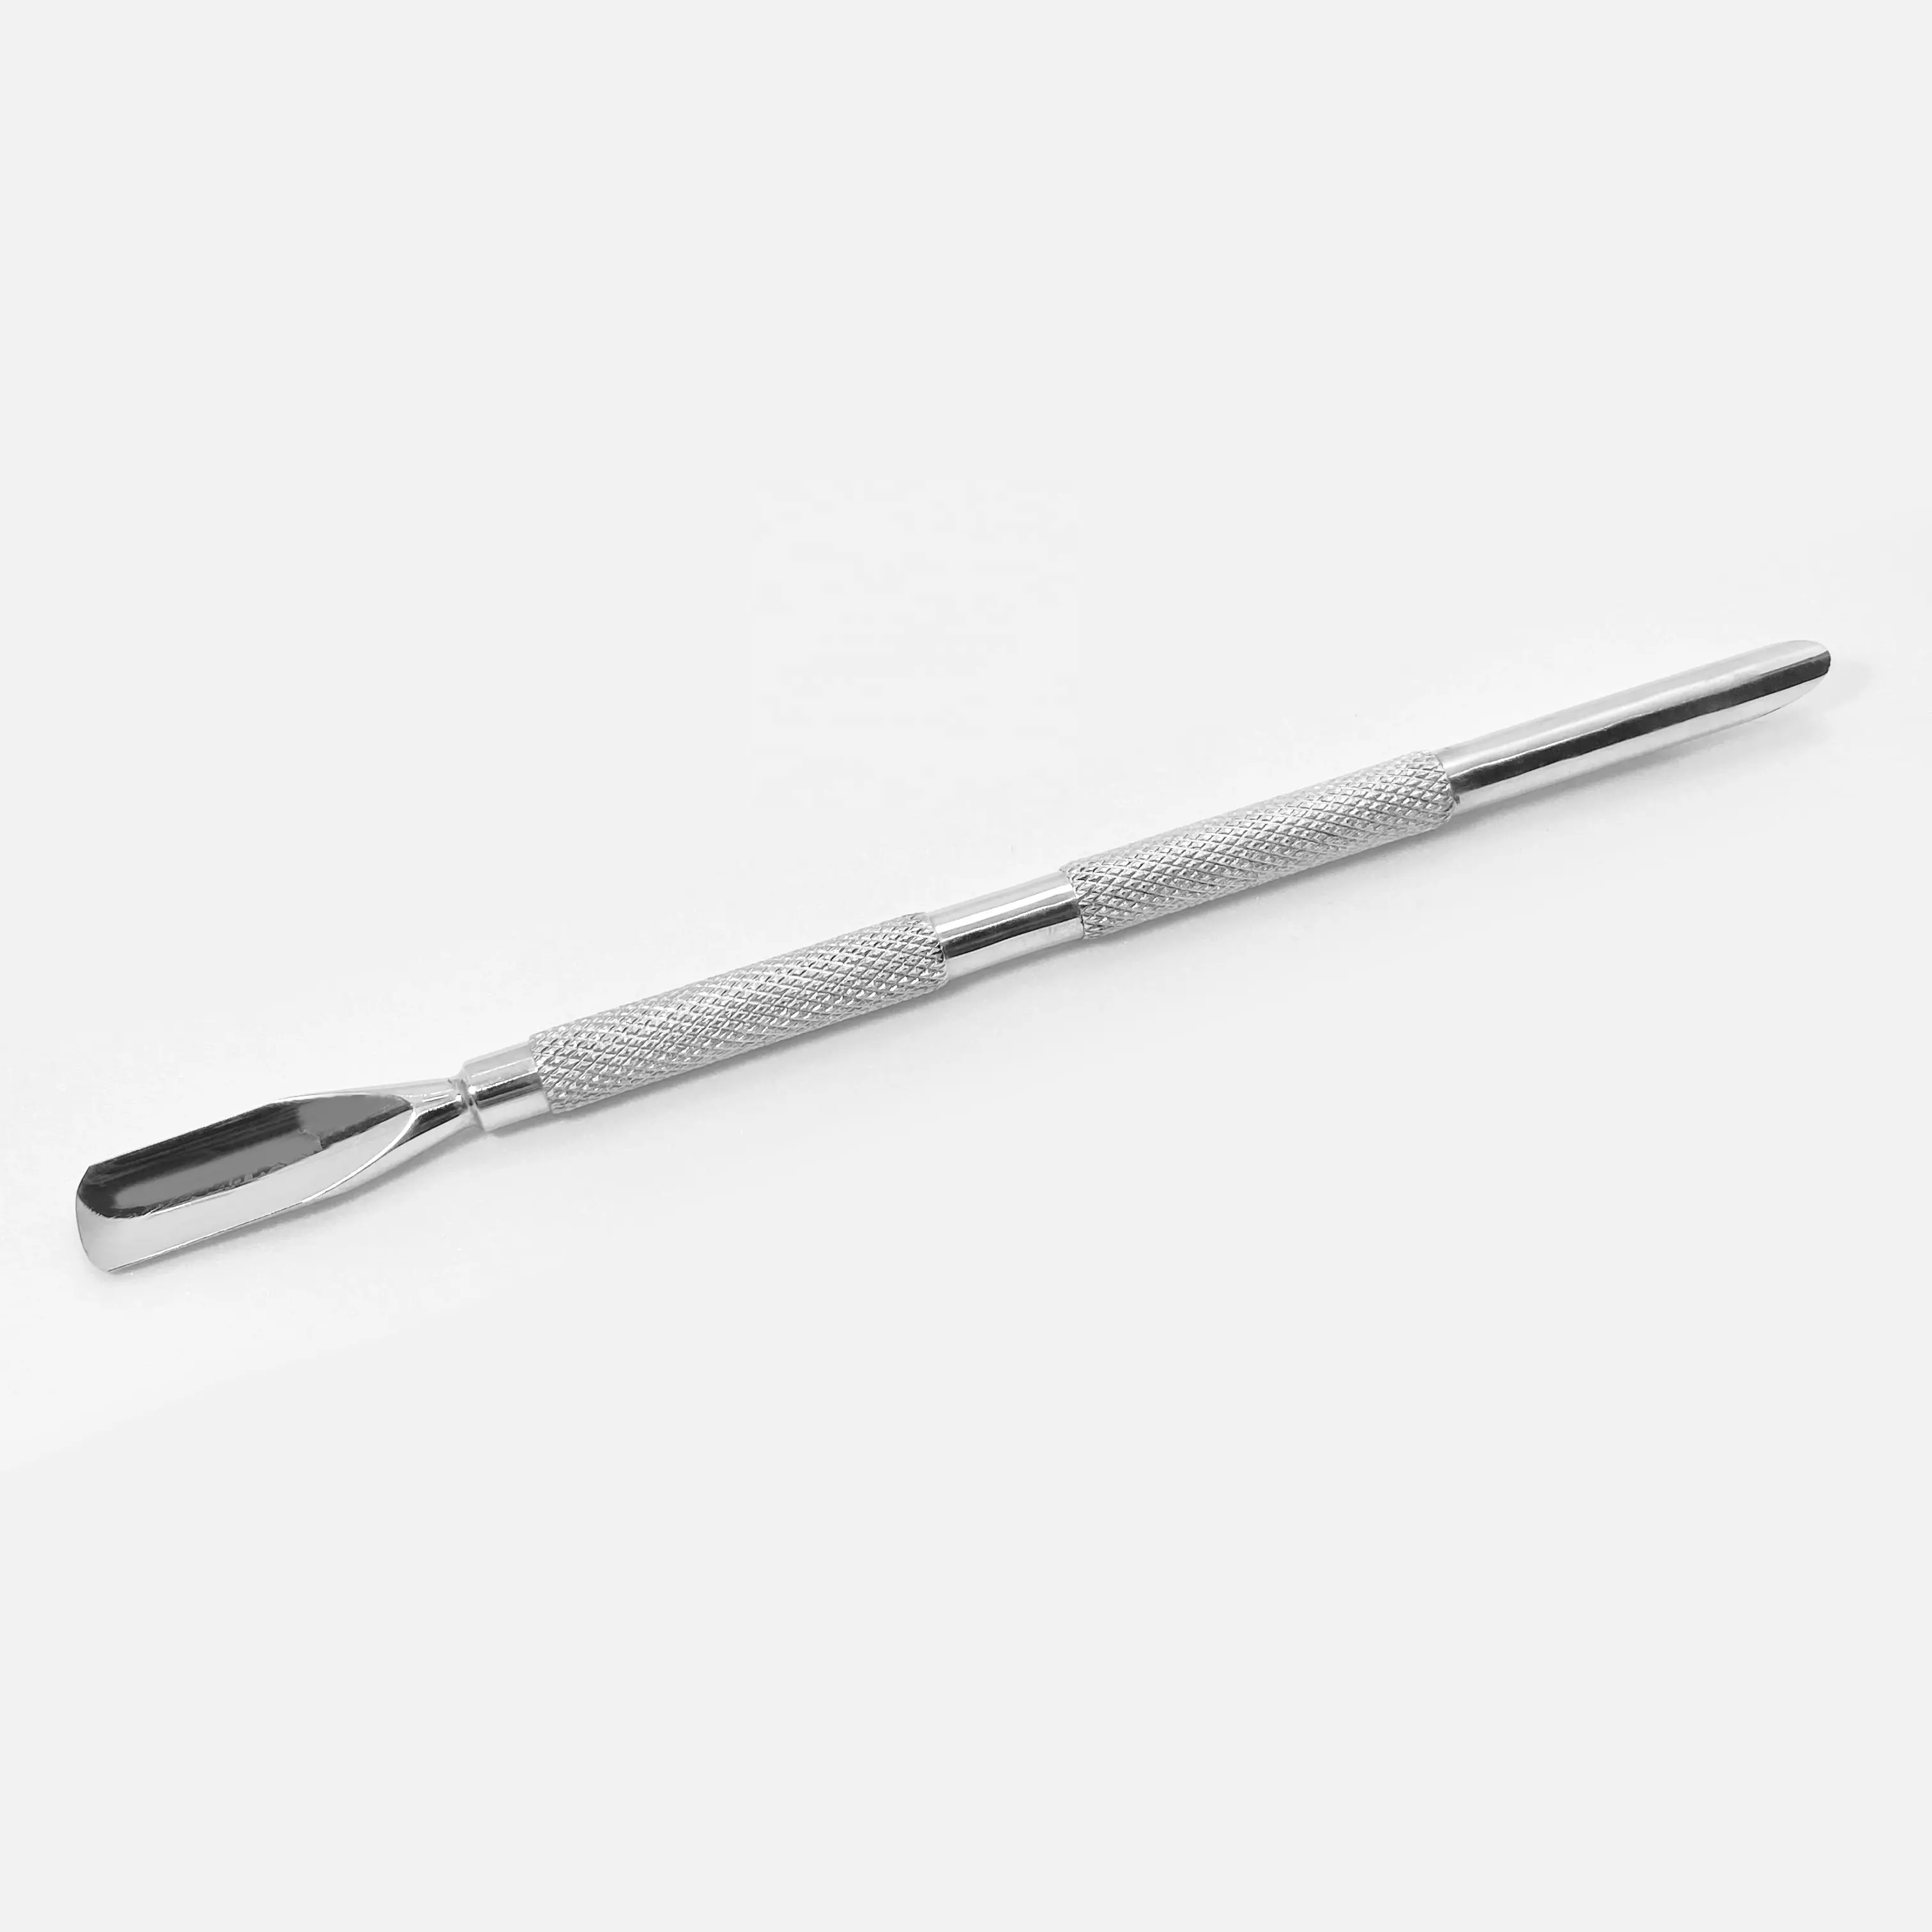 Nail Pusher High Quality Stainless Steel Manicure Pedicure Nail Art Tool Professional Nail Cuticle Pusher For Sale